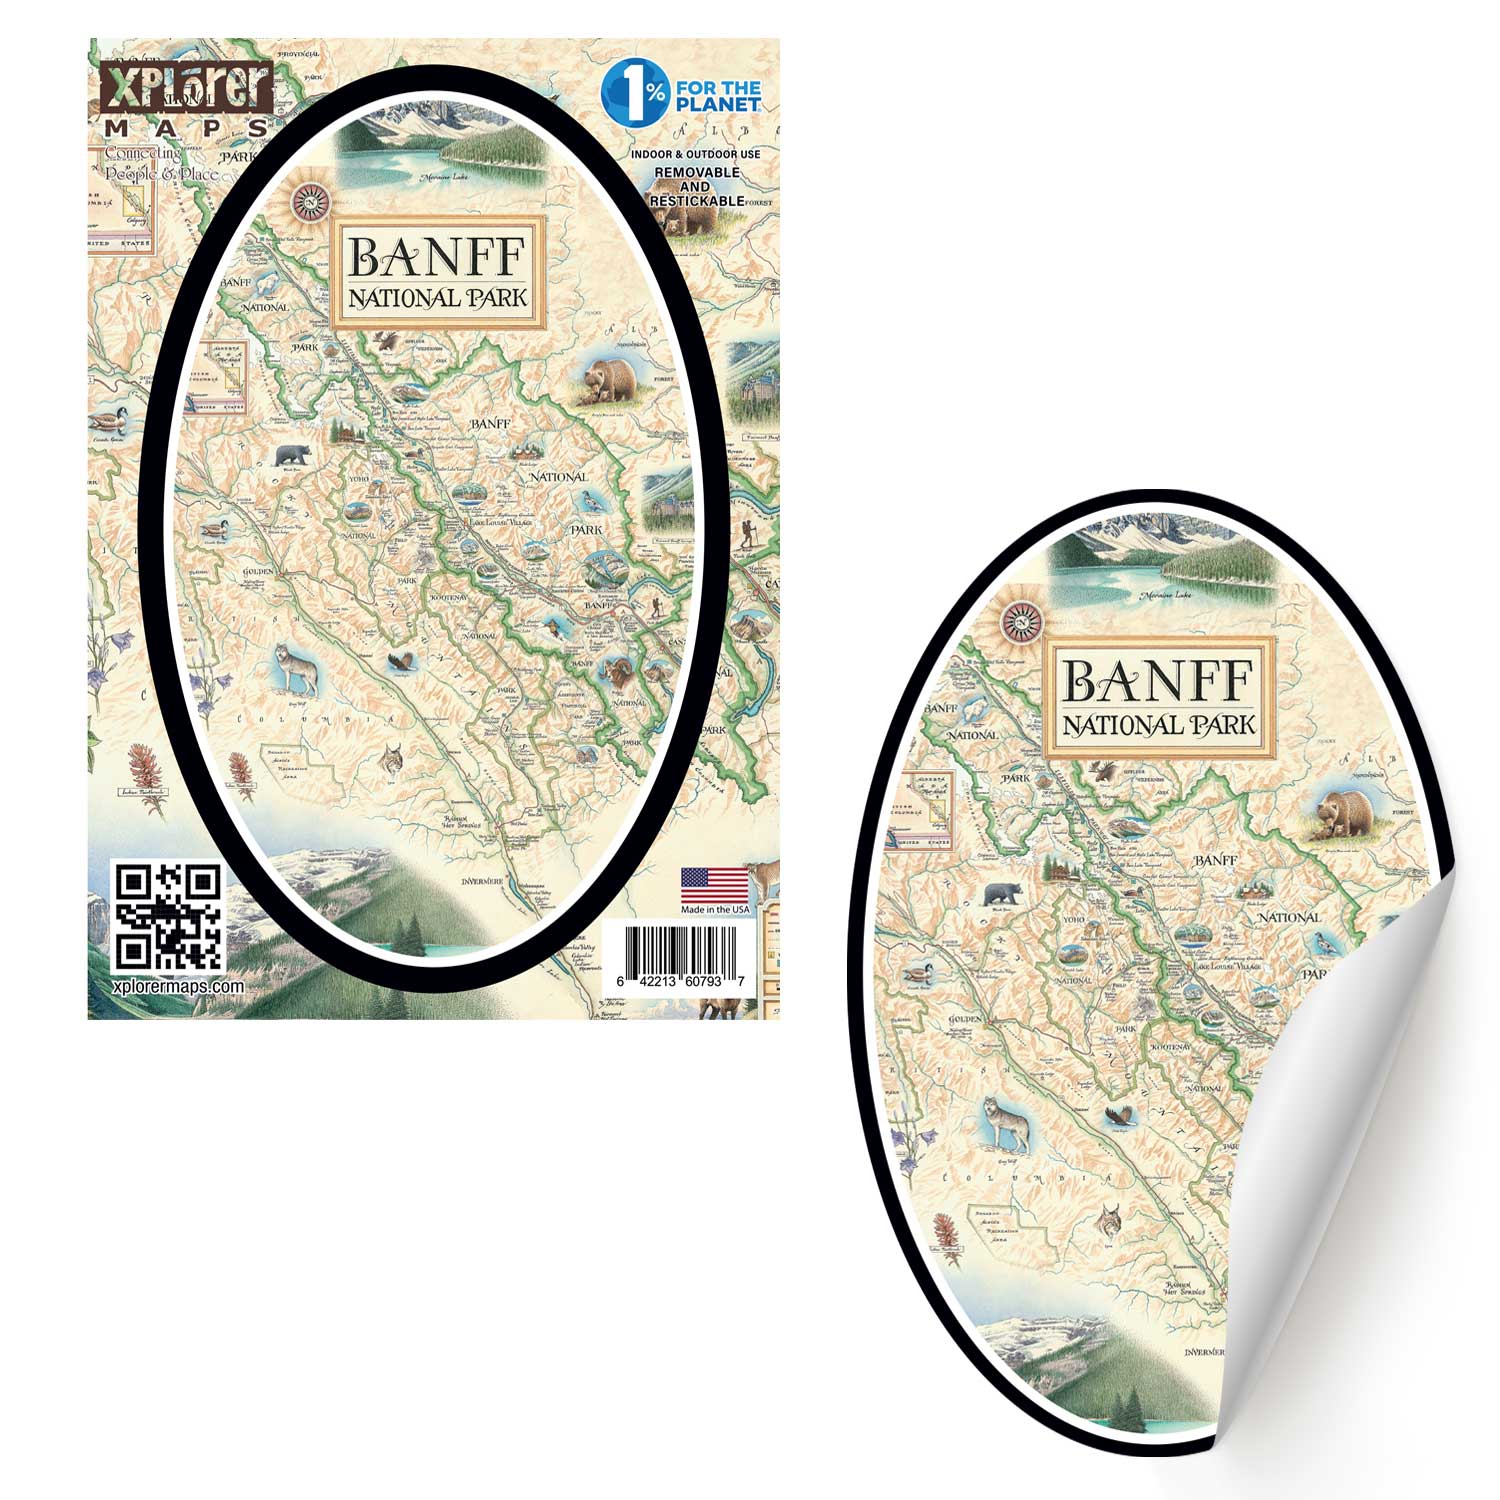 Banff National Park Map Sticker by Xplorer Maps. Featuring grizzly bears, elk, mountain lions, and wolves. The map also features Jasper National Park, Yoho National Park, and Kootenay National Park. The featured illustration of the map is Lake Louise.